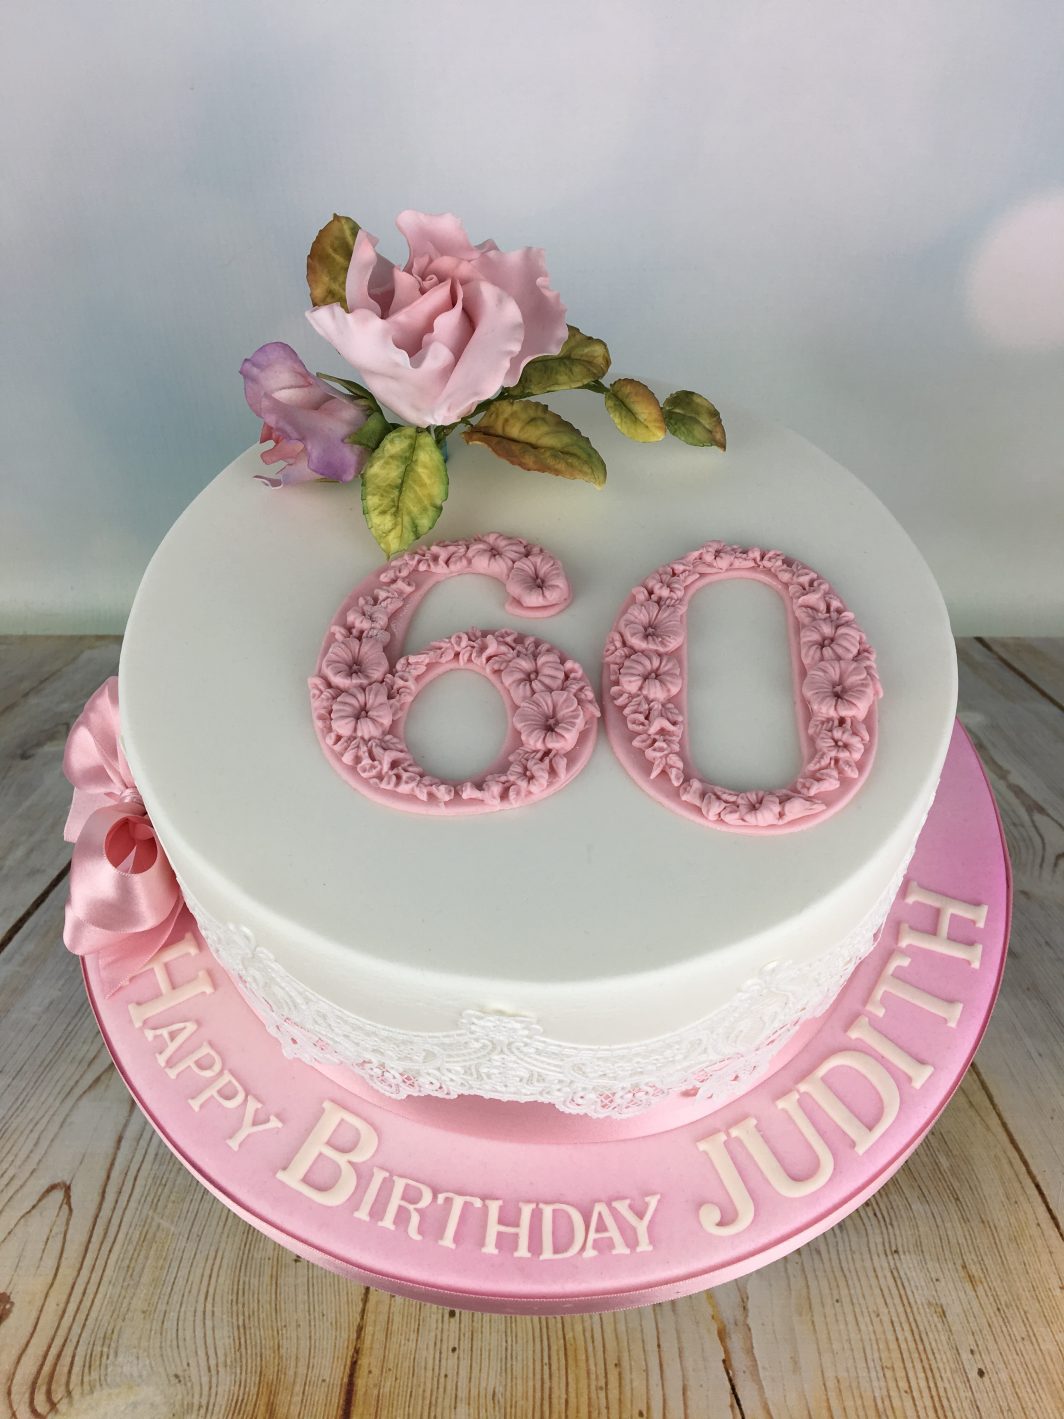 Birthday Cakes for 60 Year Olds